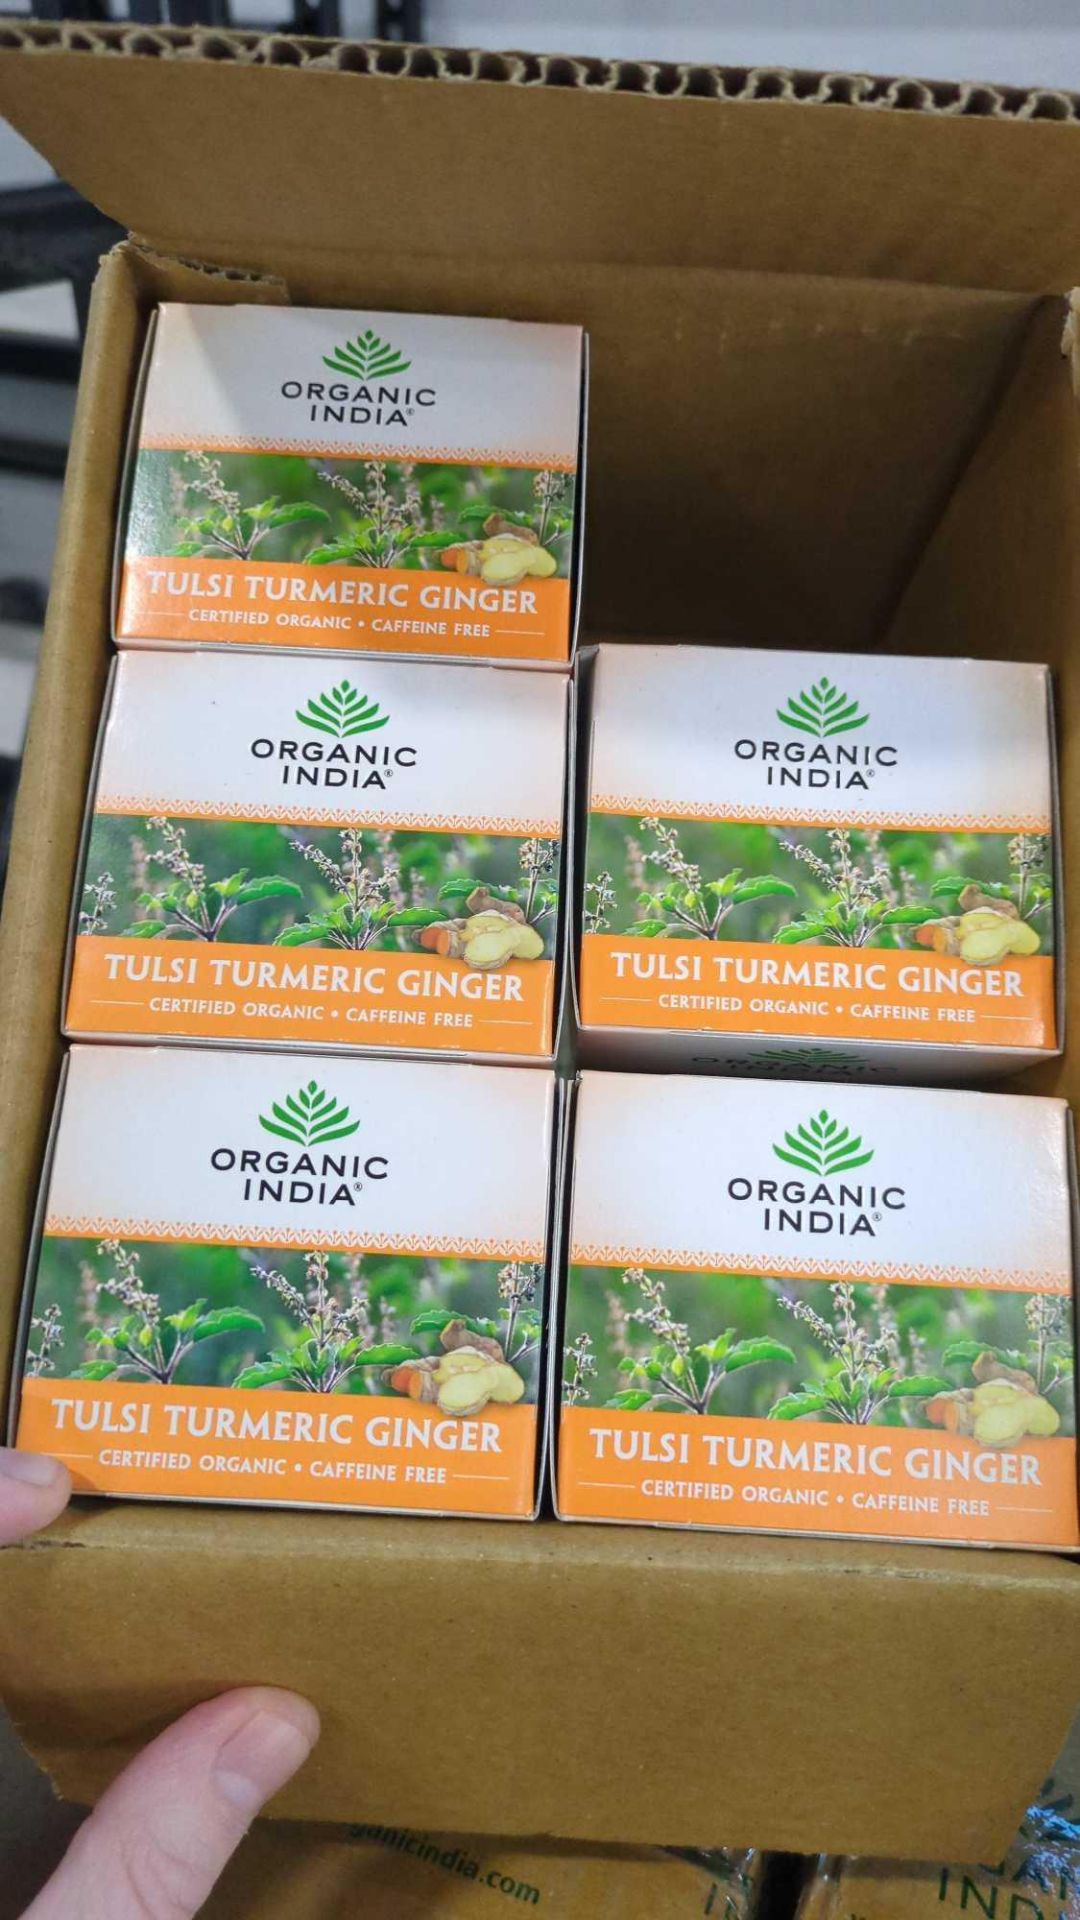 36 boxes...216 boxes of organic India tulsi turmeric ginger - Image 4 of 5